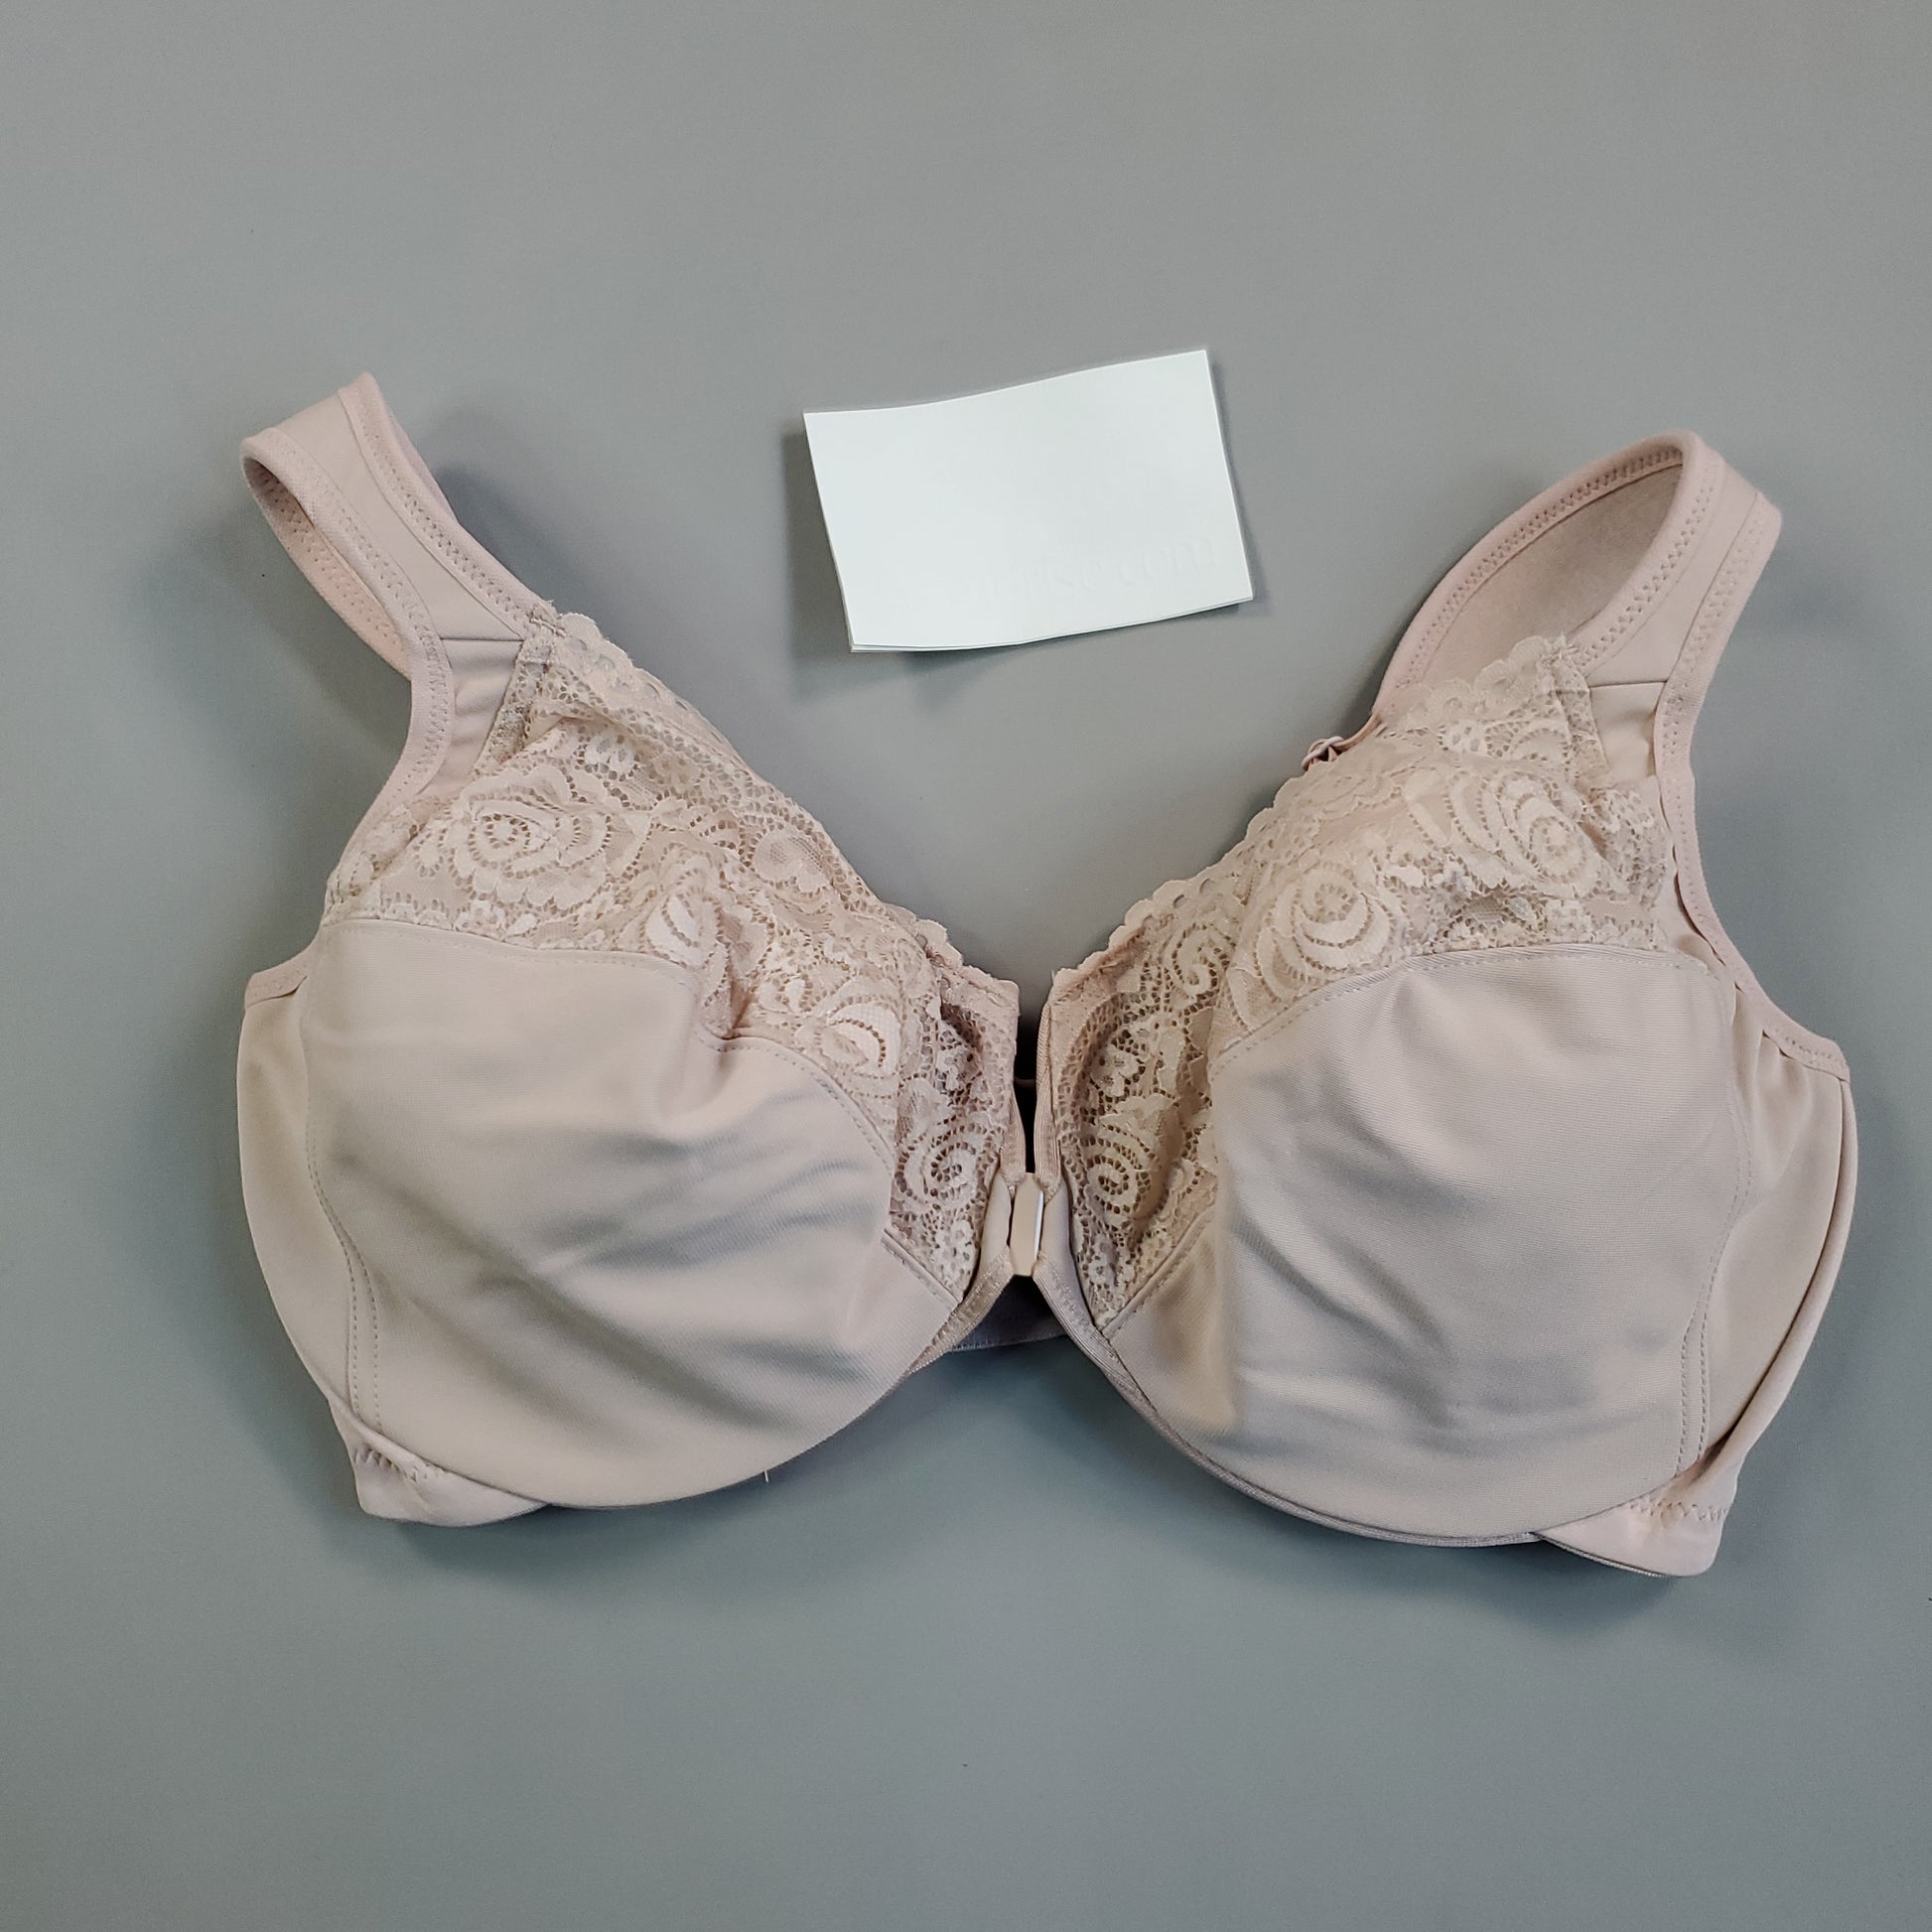 GLAMORISE Wire Support Bra Women's Sz 40 DD Nude Color (New Other